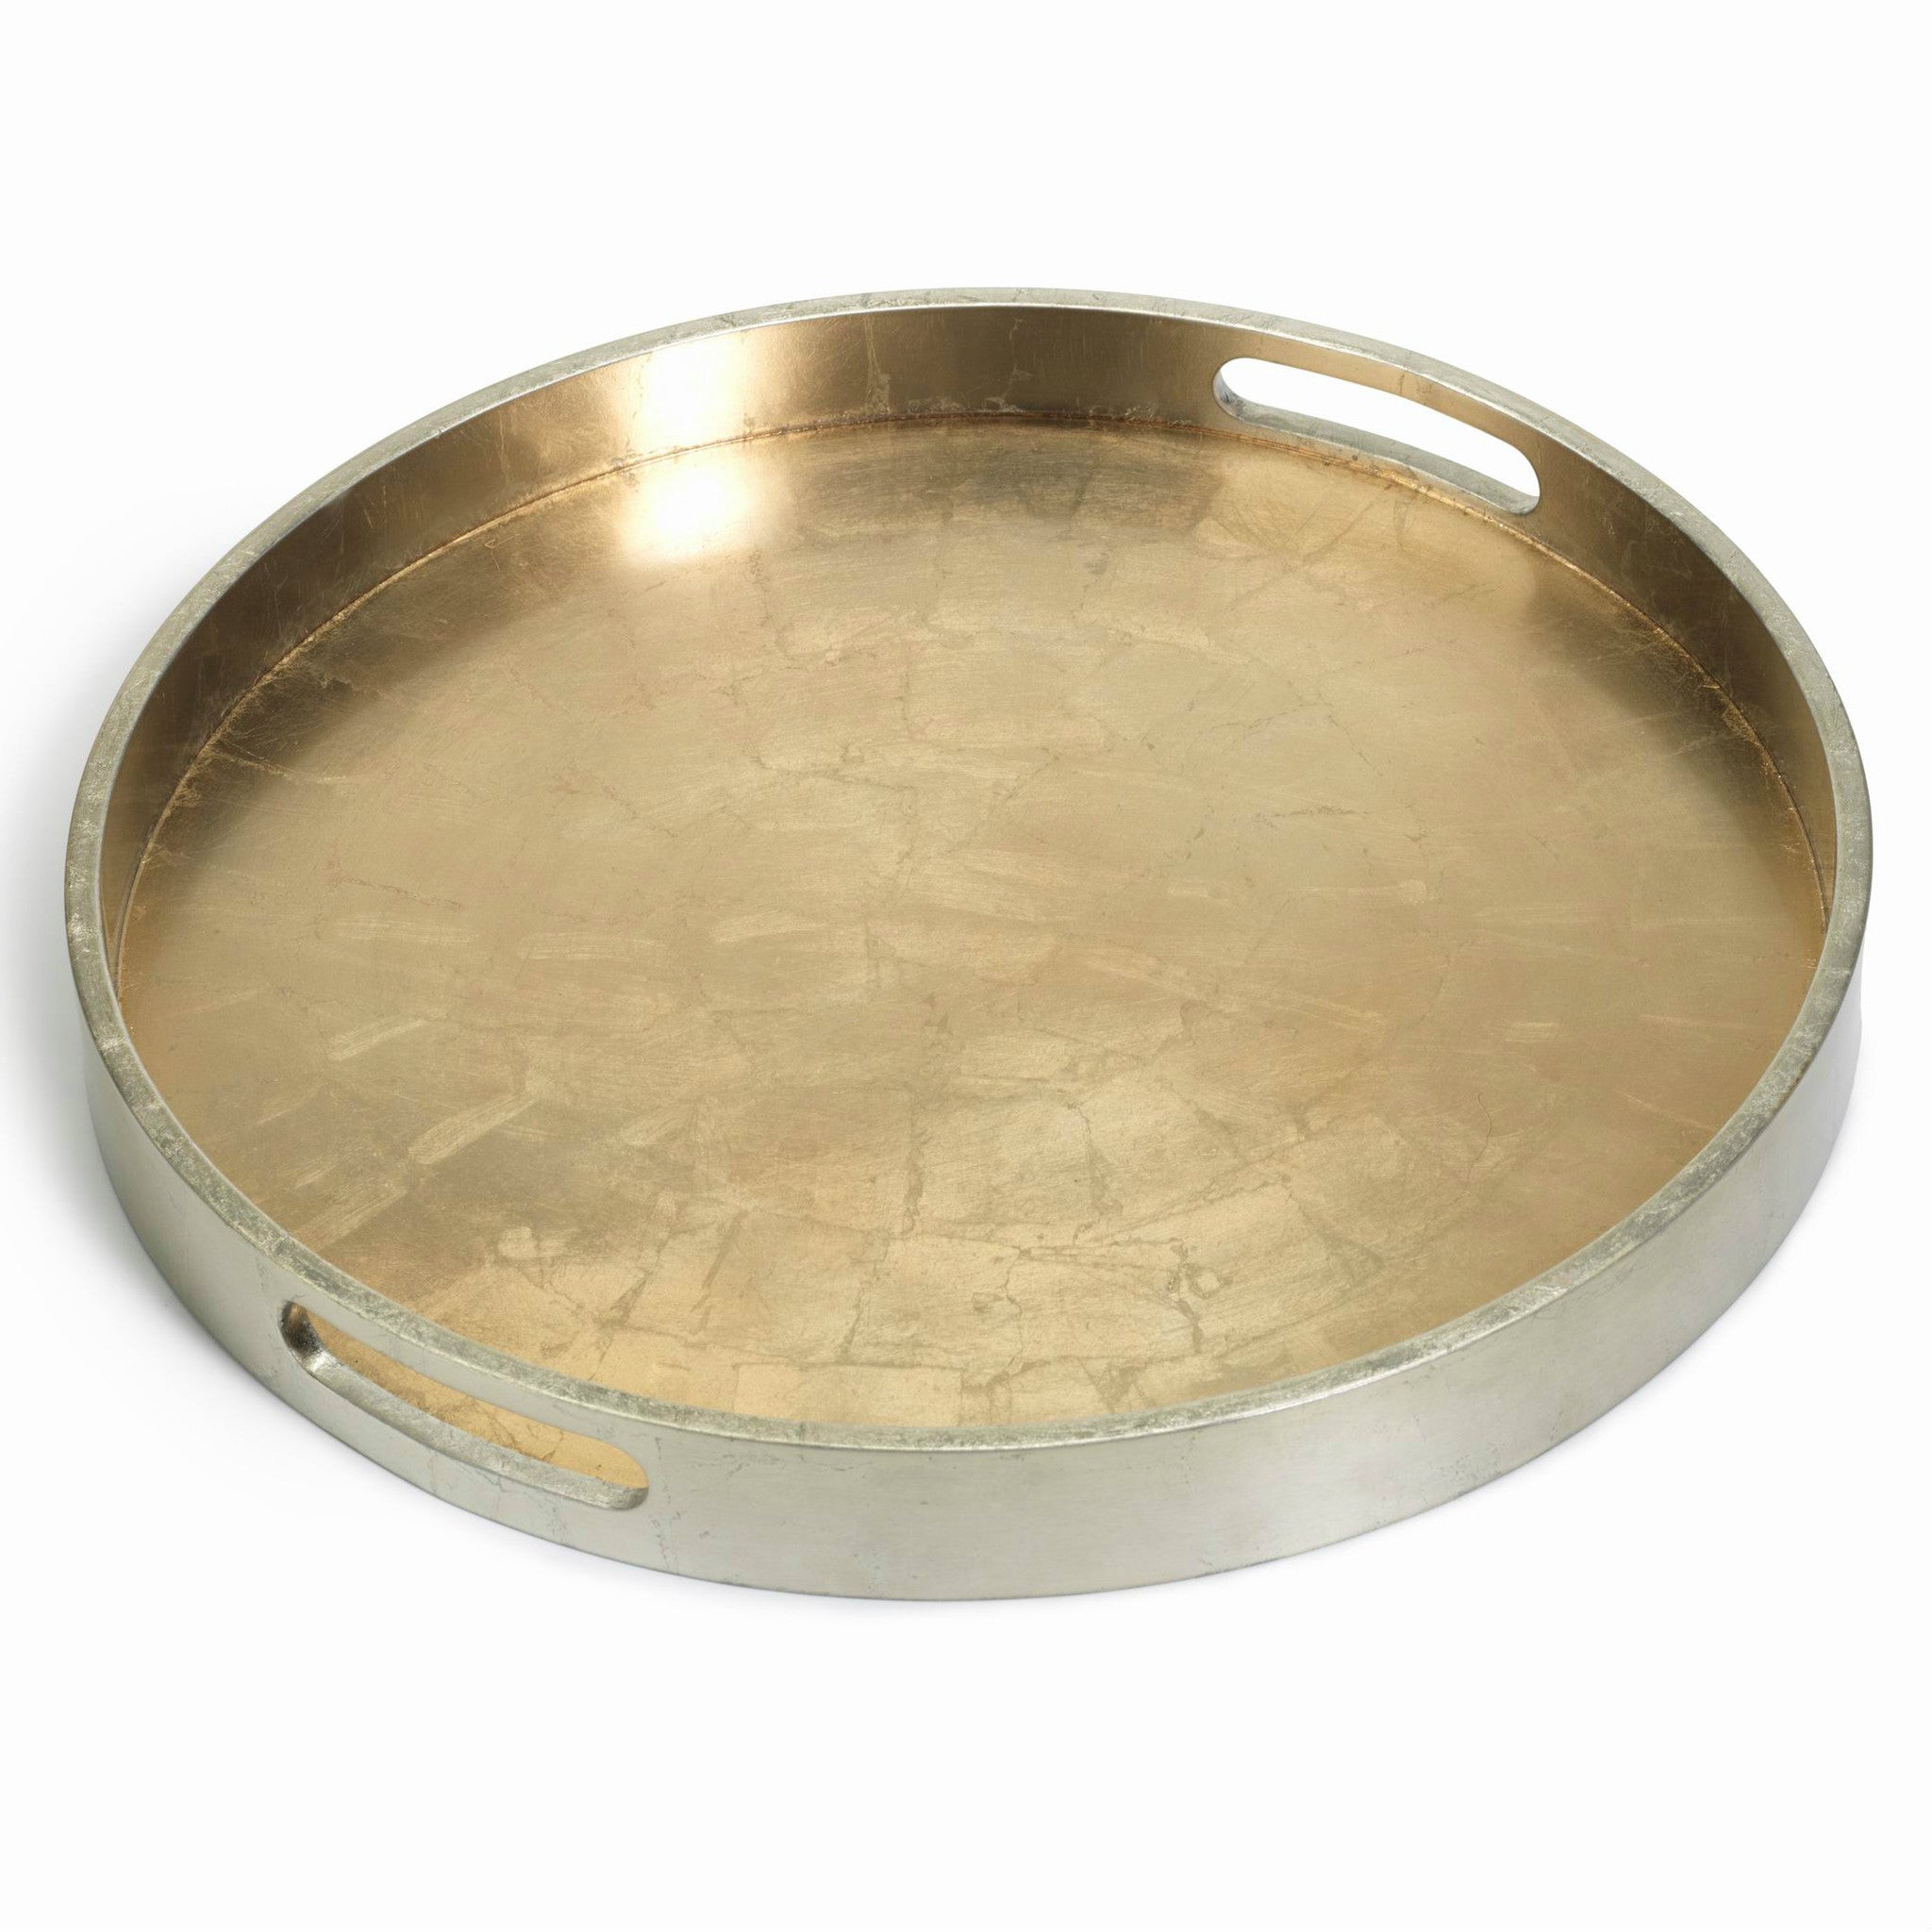 Round Antique Gold & Silver Serving Tray - CARLYLE AVENUE